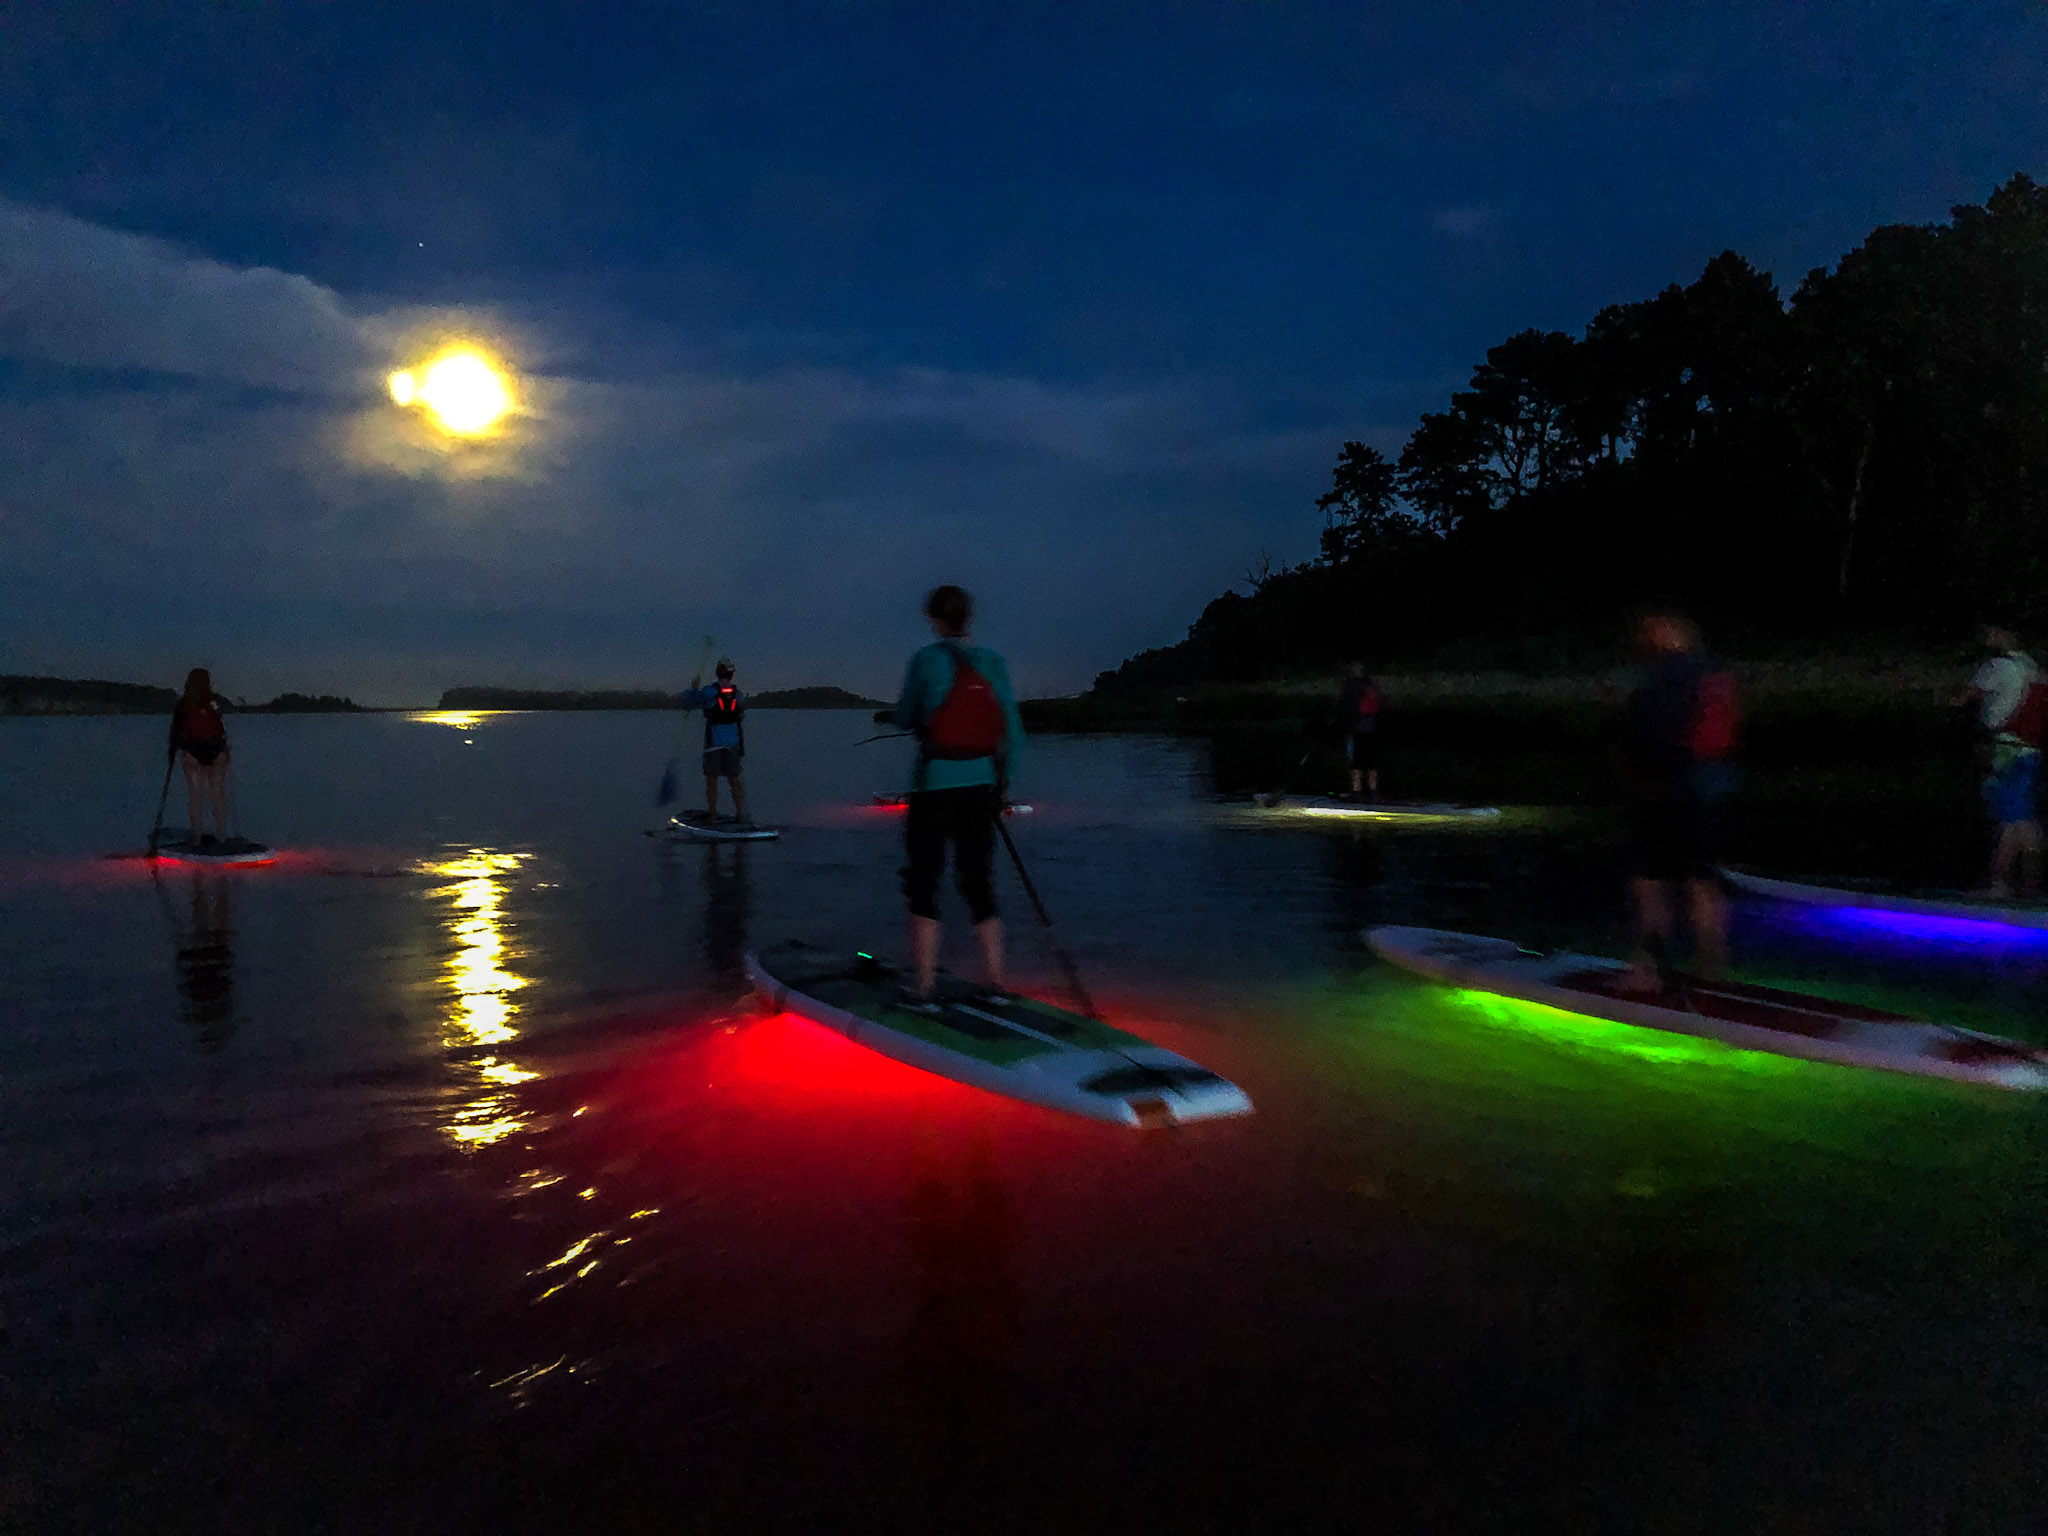 Paddleboarding under a full moon 